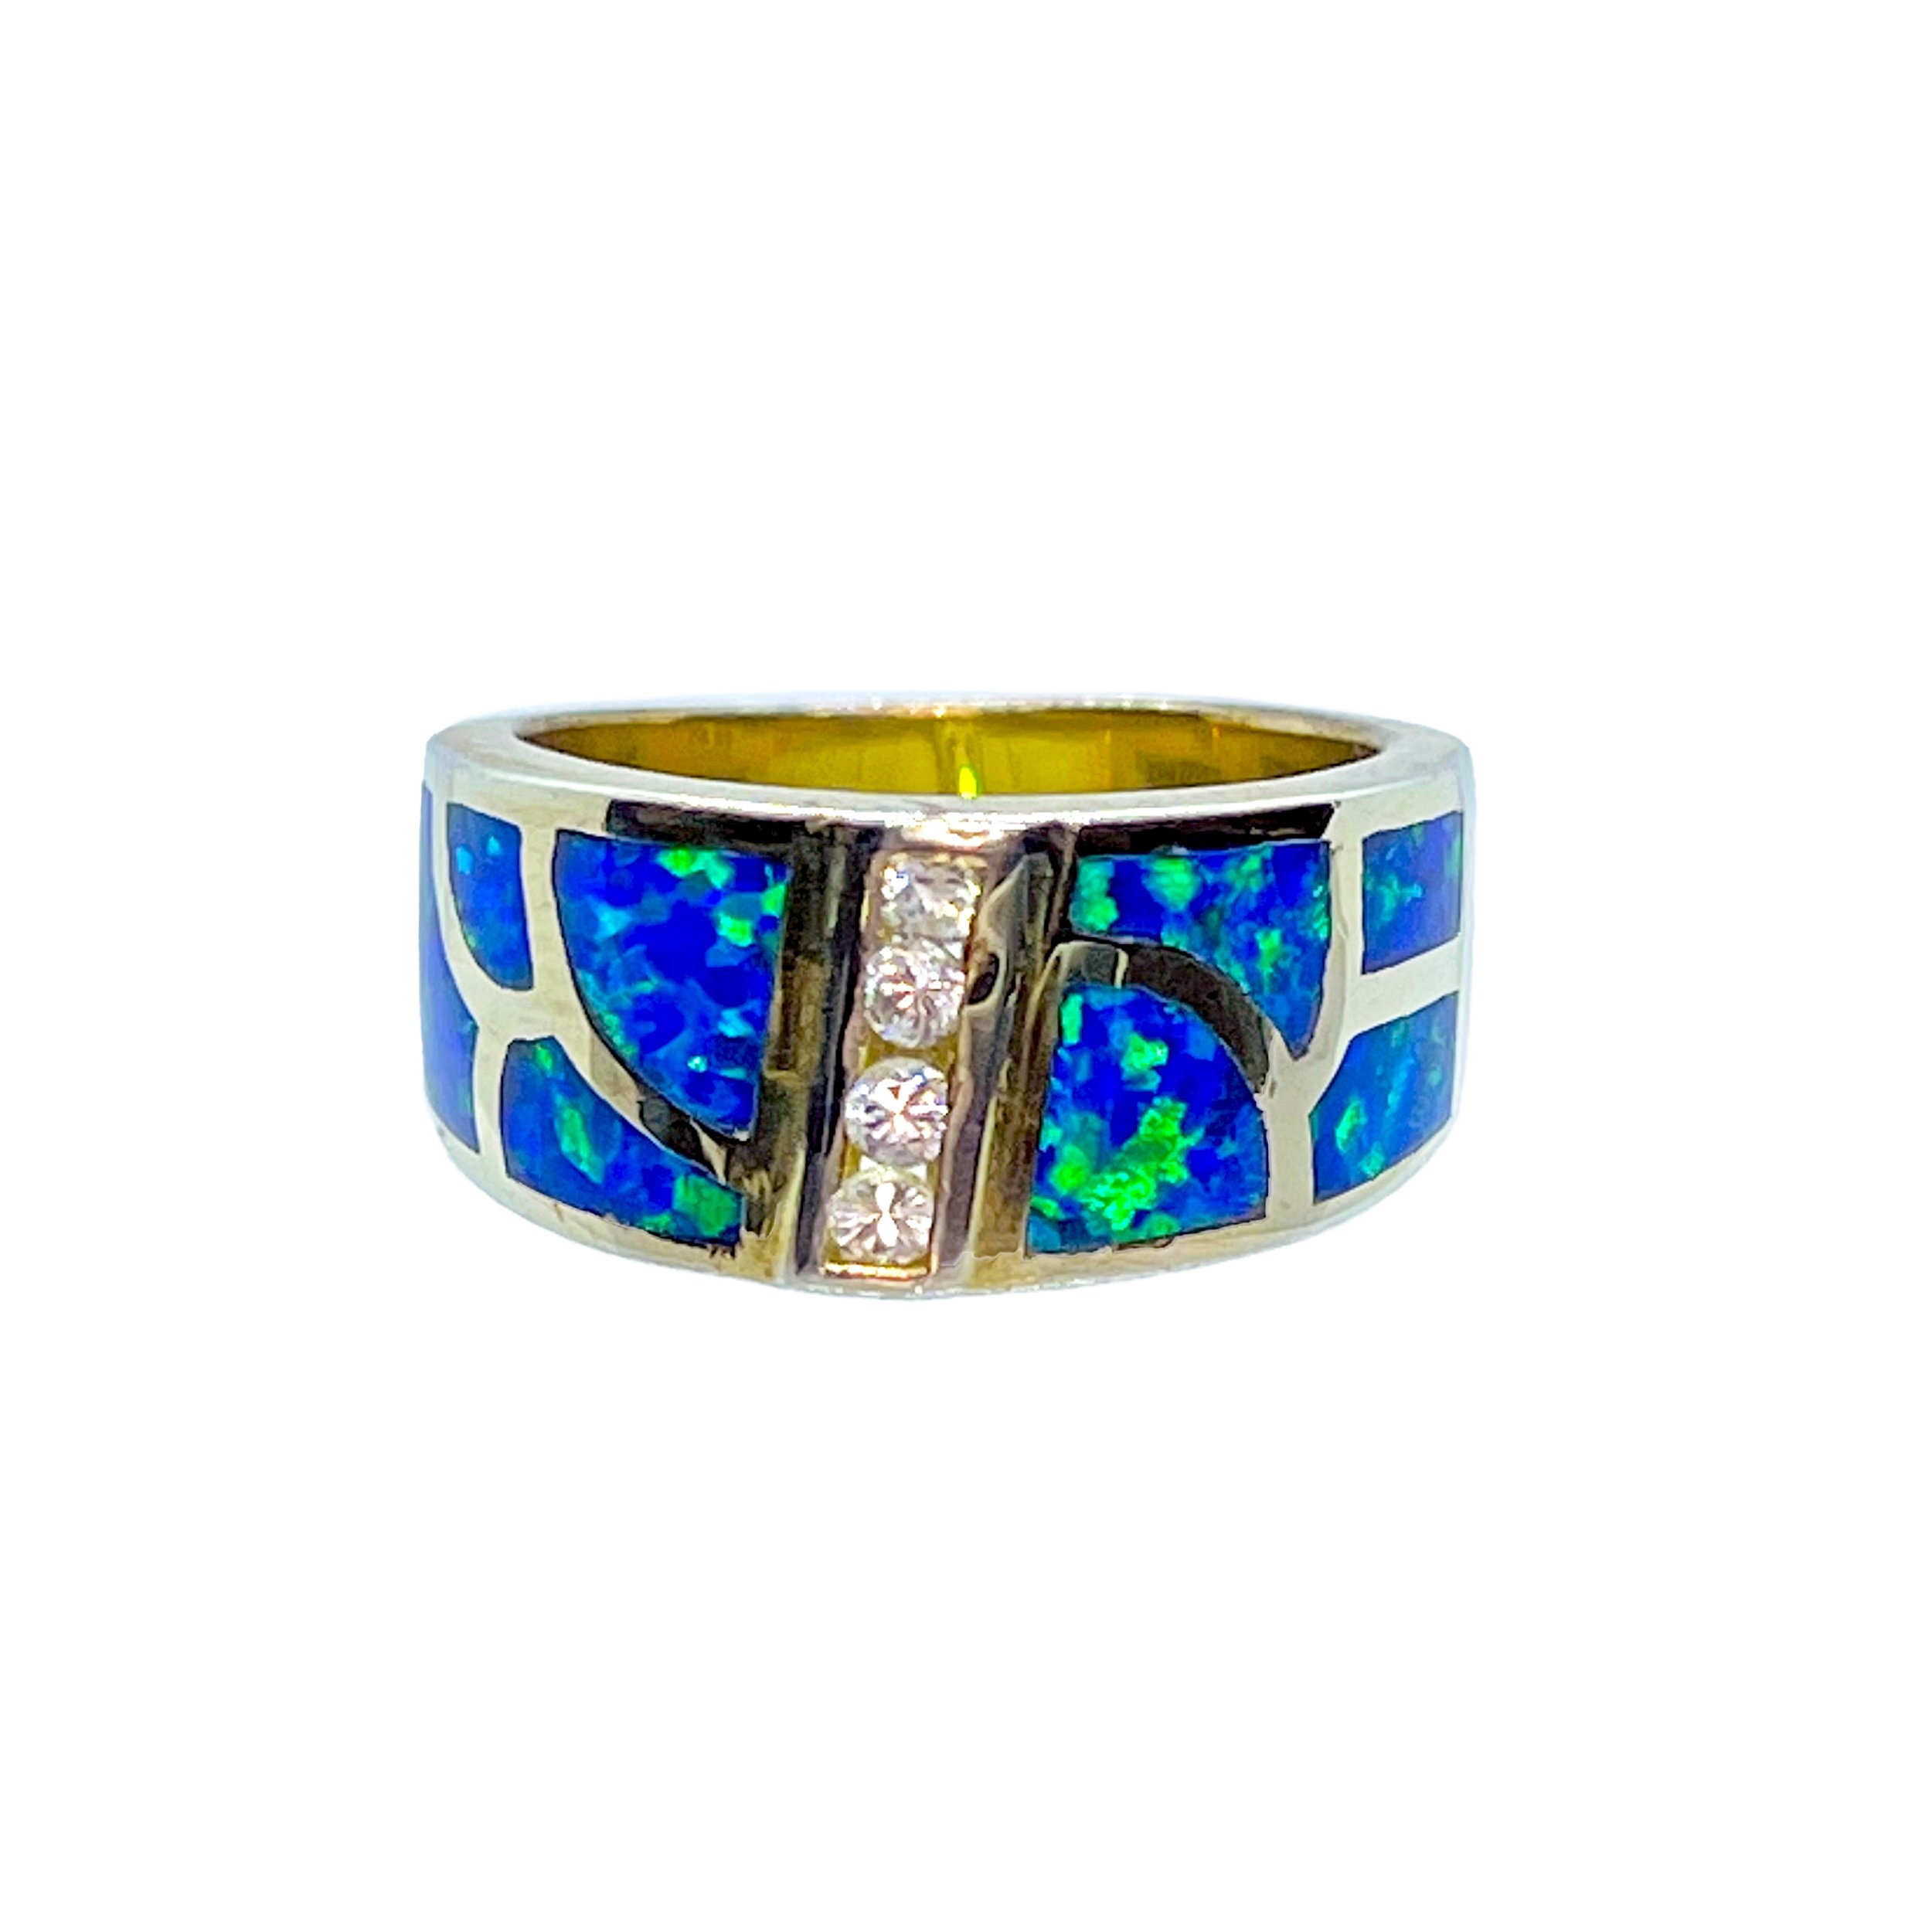 Blue Opal Ring Size 5 - Wide Band With White Cz Trio & Curved Inlay Sections - Gold Plated